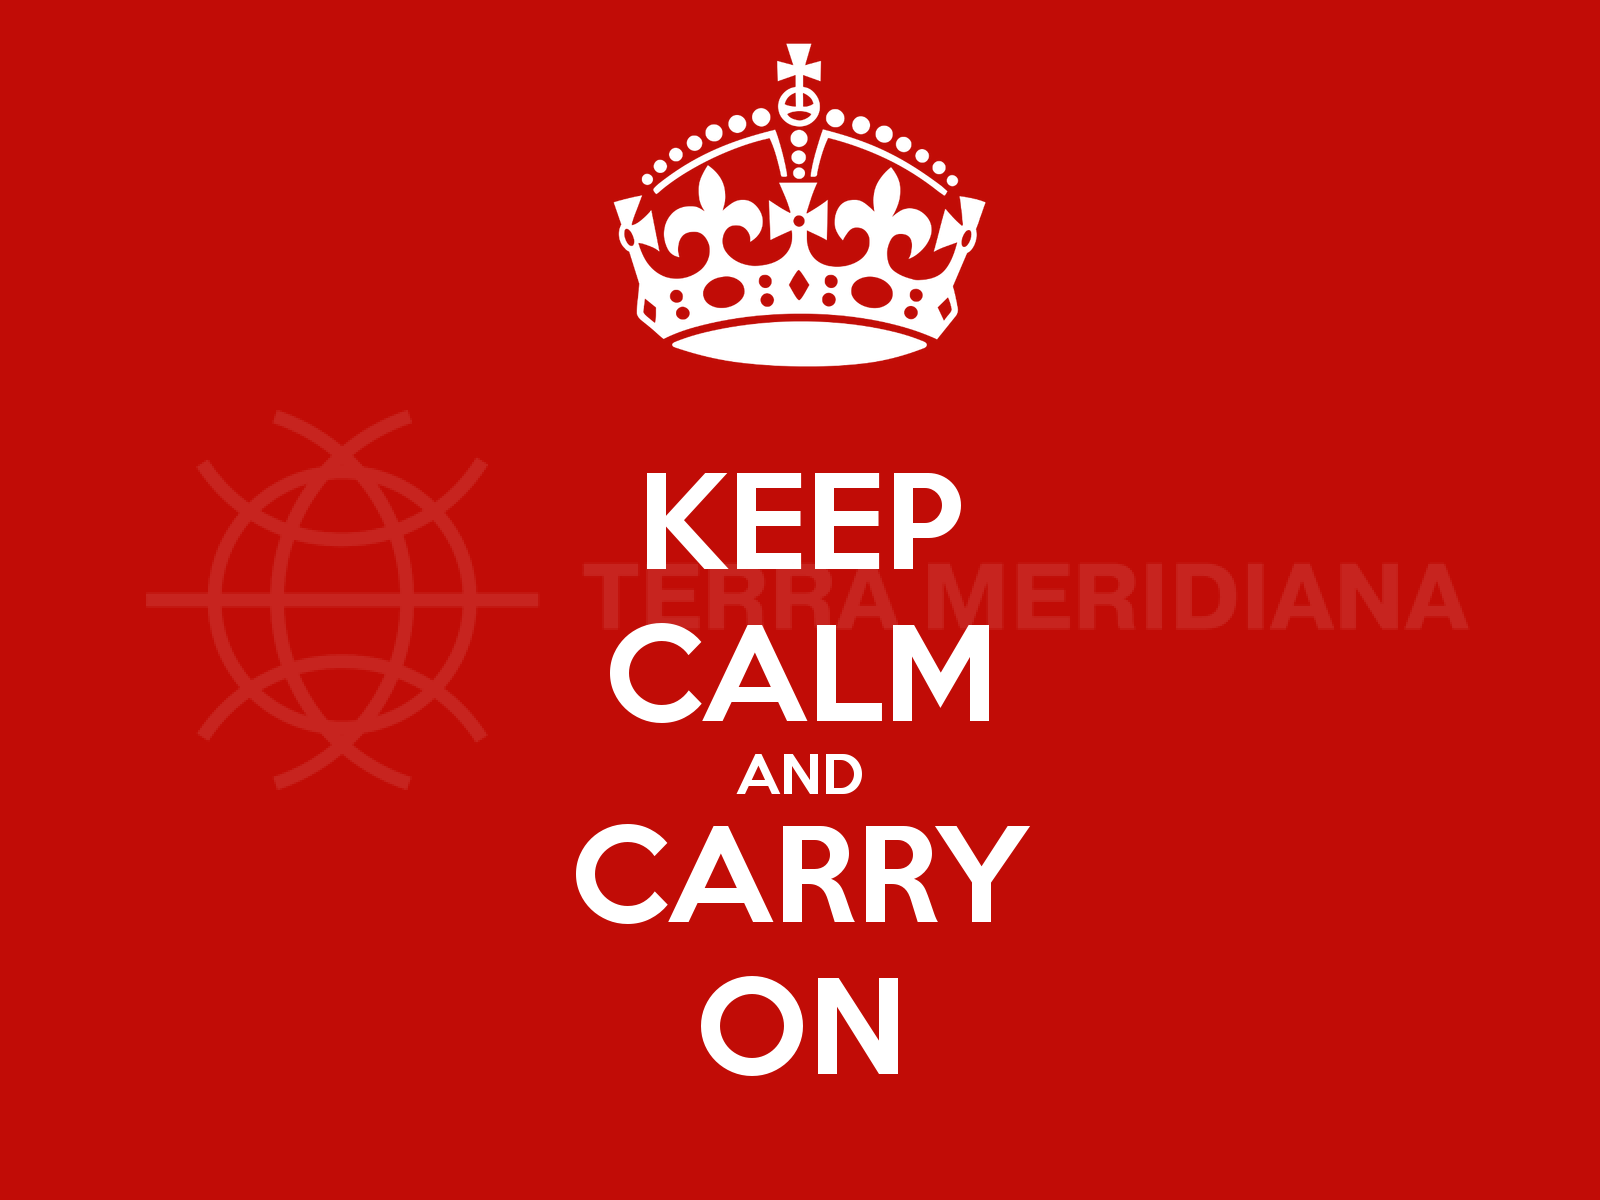 keep-calm-and-carry-on-7362-7643-hd-wallpapers.jpg